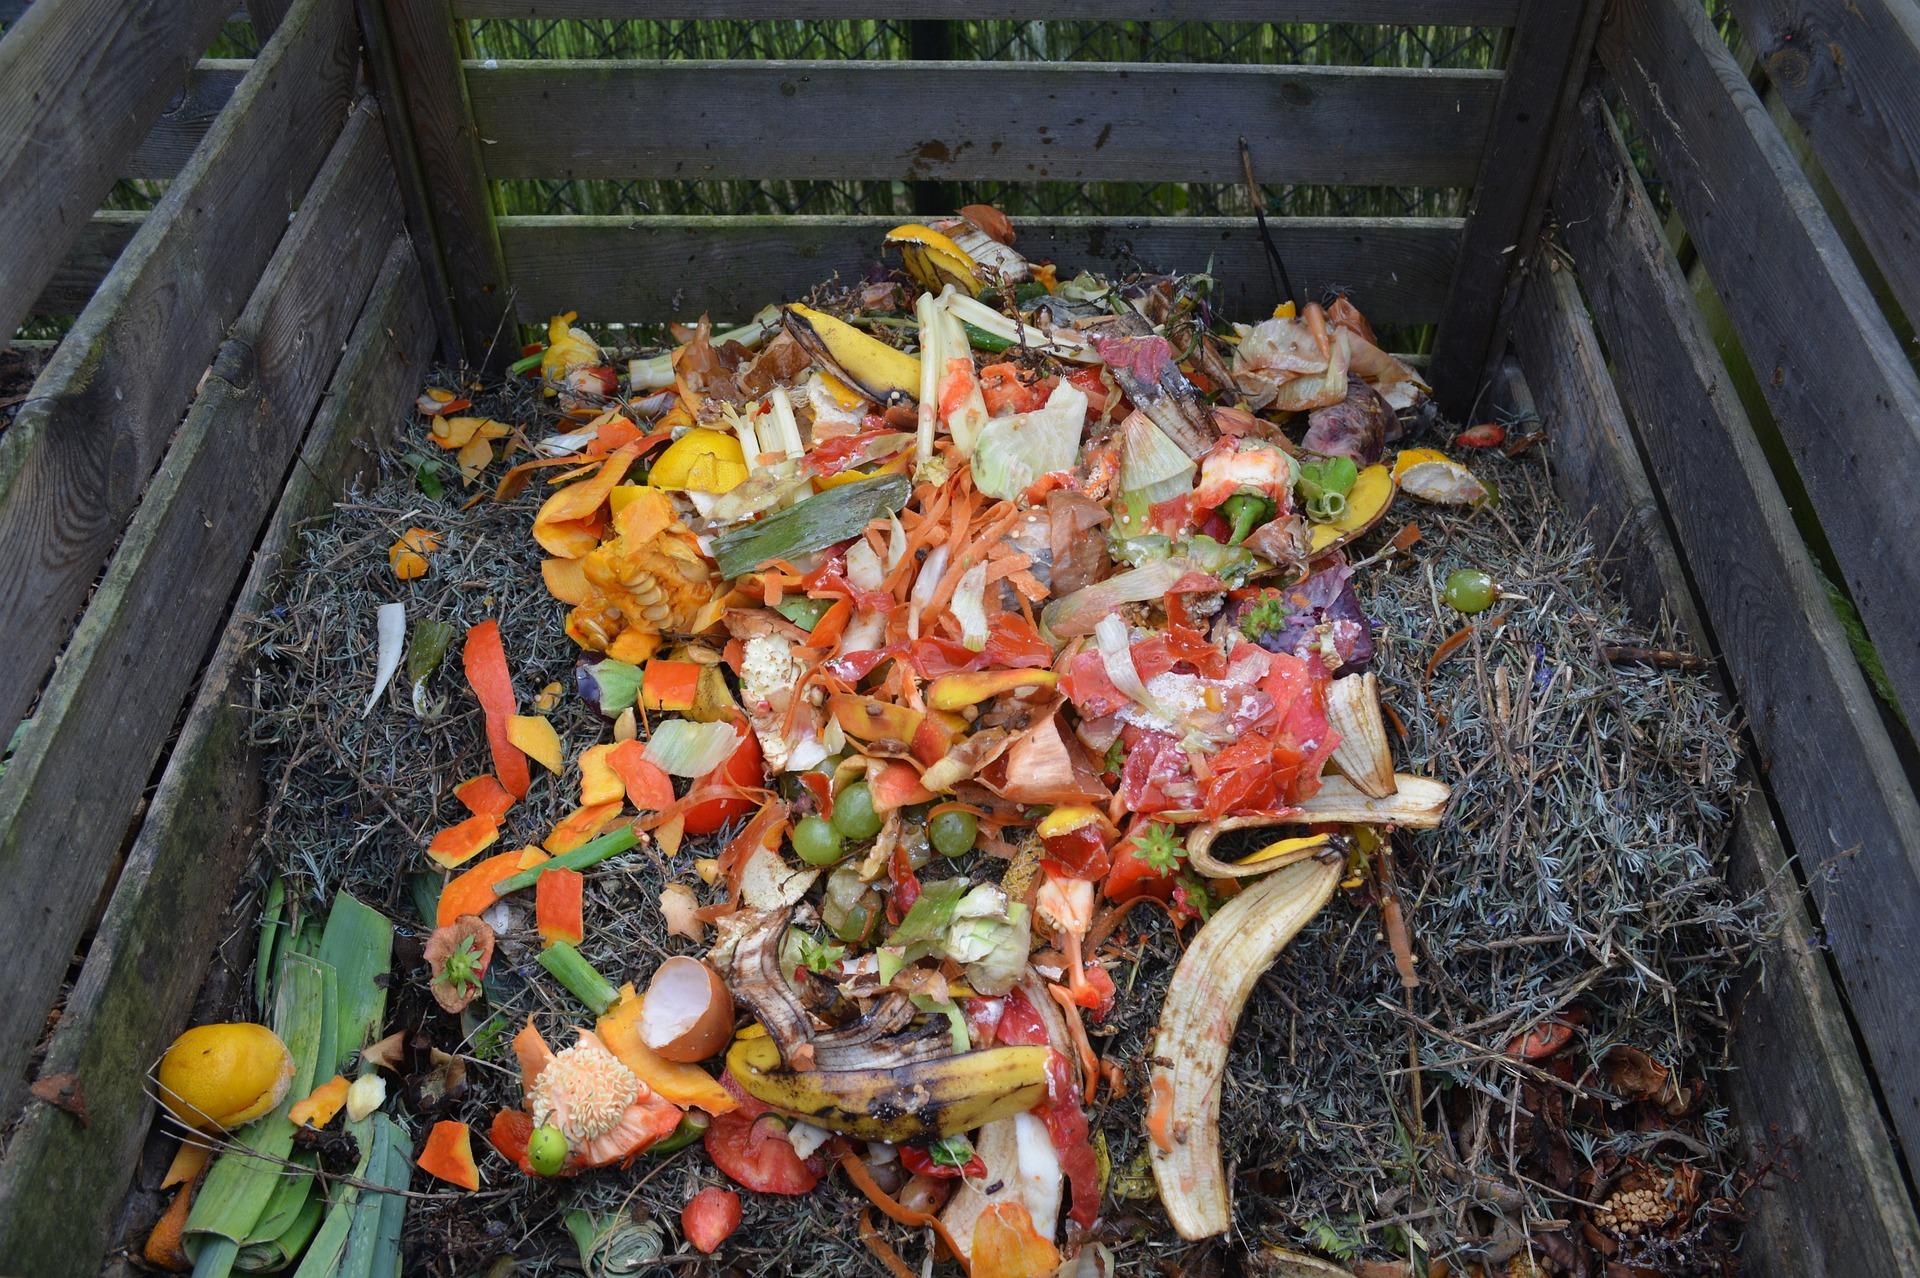 Compost Piles are Mainly Made Up of Organic Waste that Comes from the Kitchen or Garden